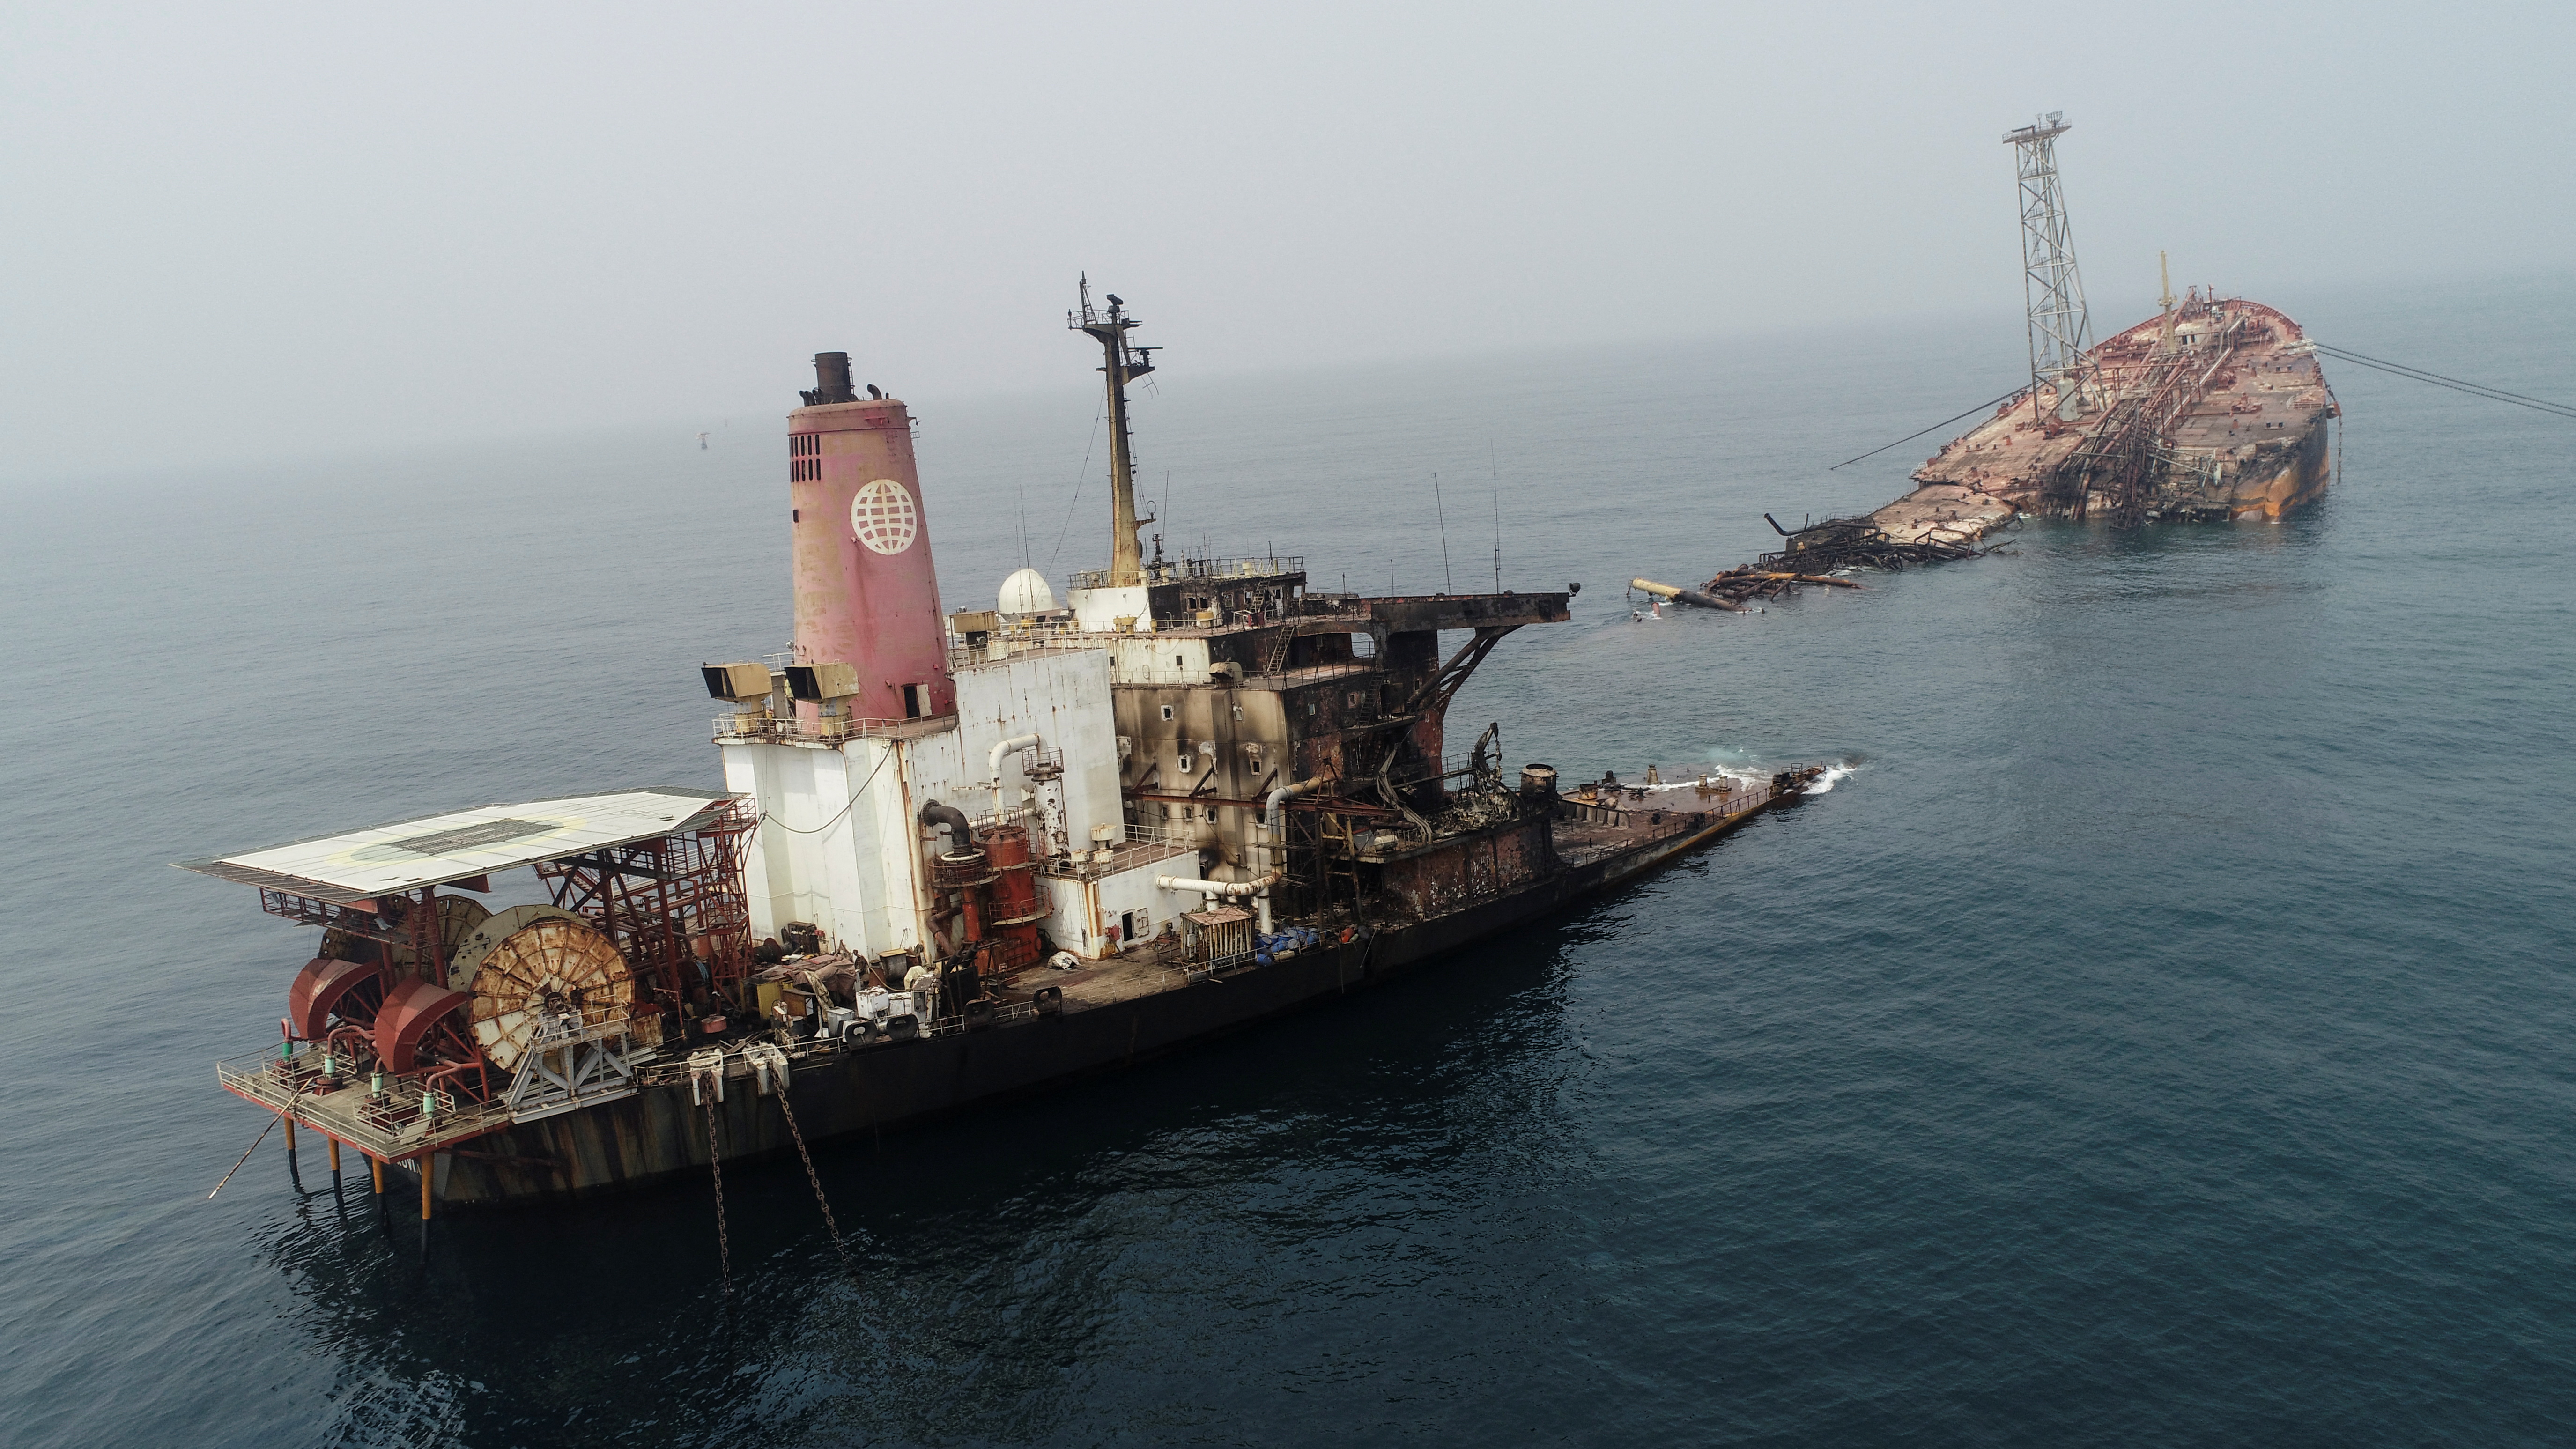 Wreckage of the Trinity Spirit floating production, storage and offloading (FPSO) vessel after explosion, in Warri